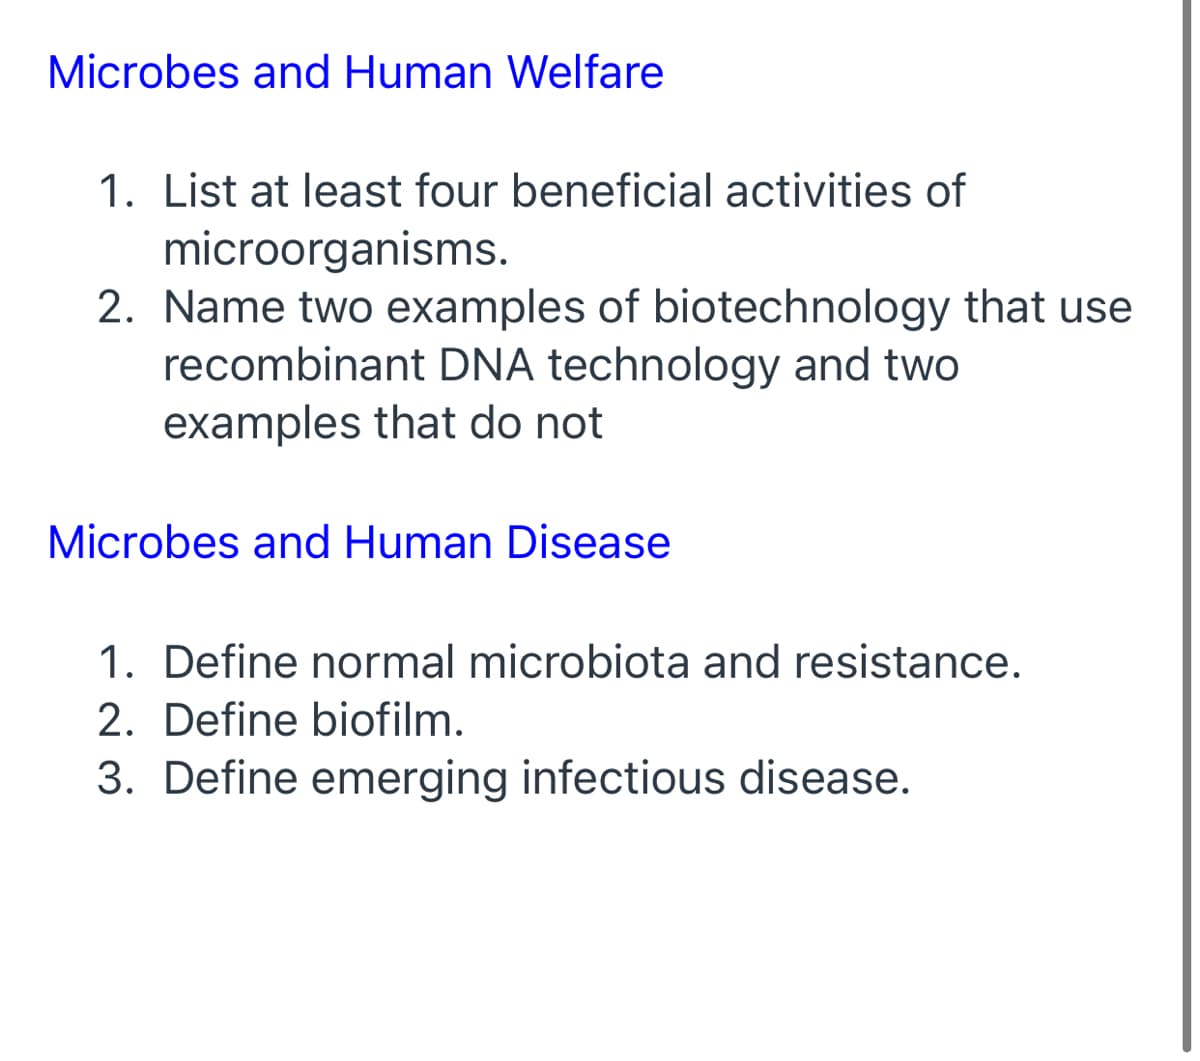 Microbes and Human Welfare
1. List at least four beneficial activities of
microorganisms.
2. Name two examples of biotechnology that use
recombinant DNA technology and two
examples that do not
Microbes and Human Disease
1. Define normal microbiota and resistance.
2. Define biofilm.
3. Define emerging infectious disease.
